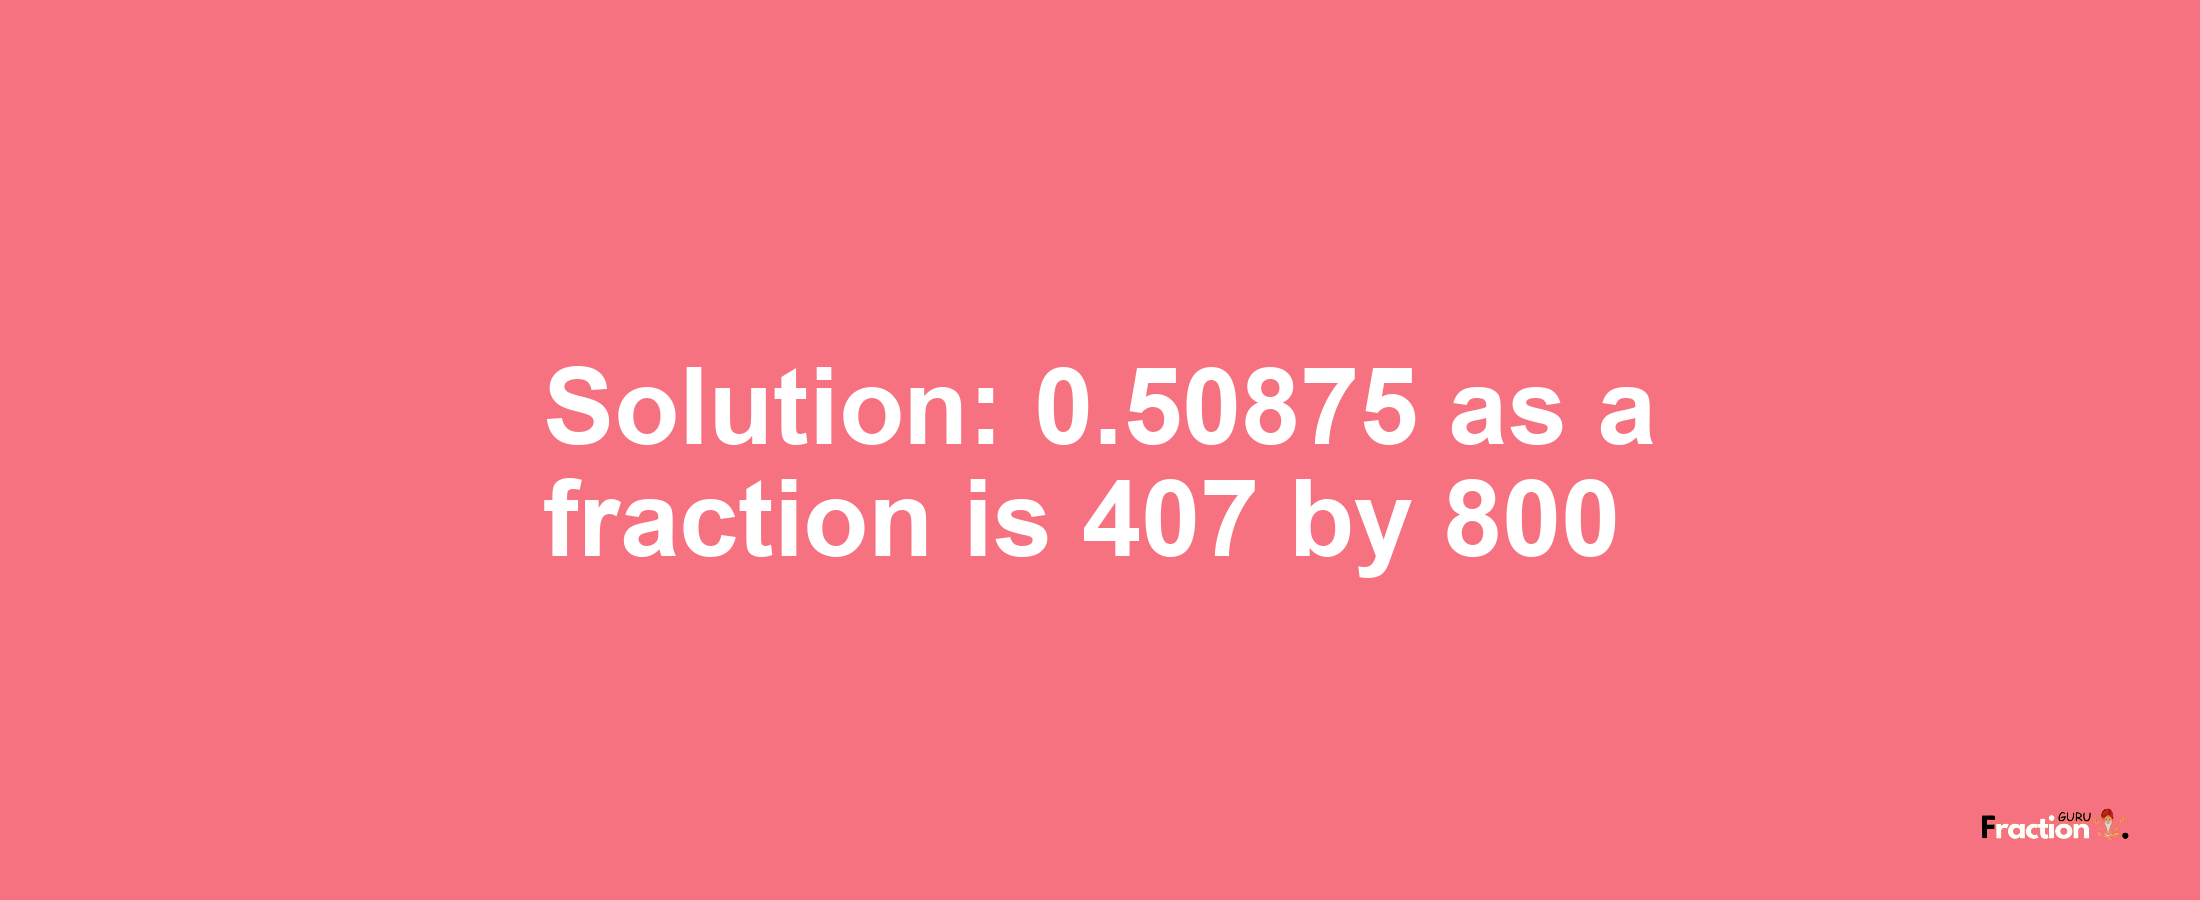 Solution:0.50875 as a fraction is 407/800